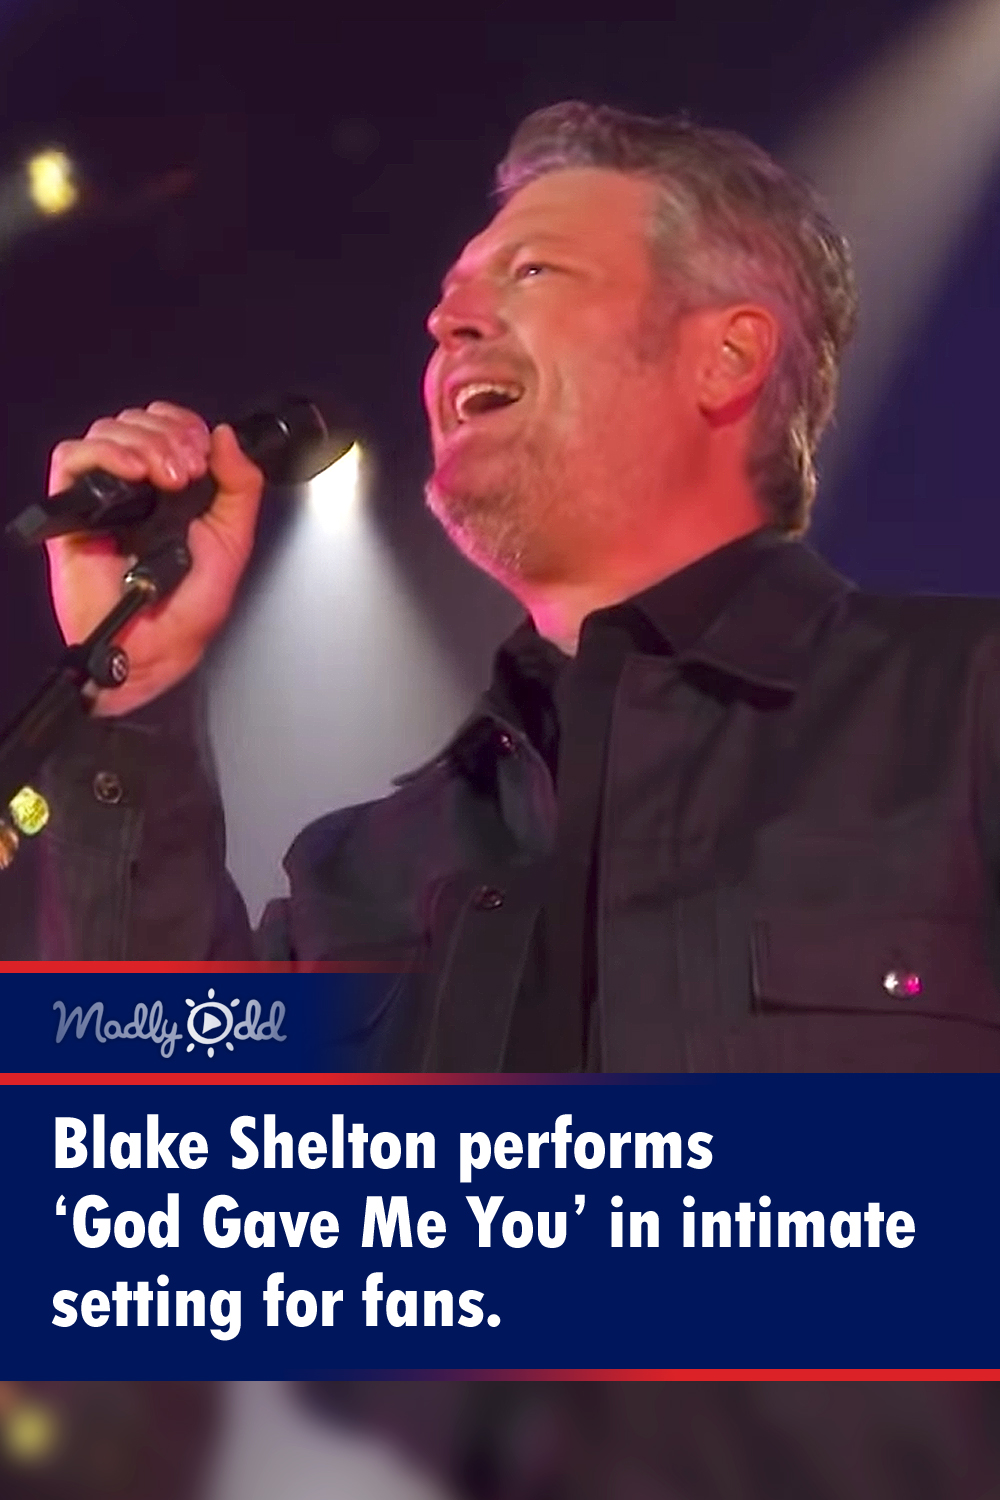 Blake Shelton performs ‘God Gave Me You’ in intimate setting for fans